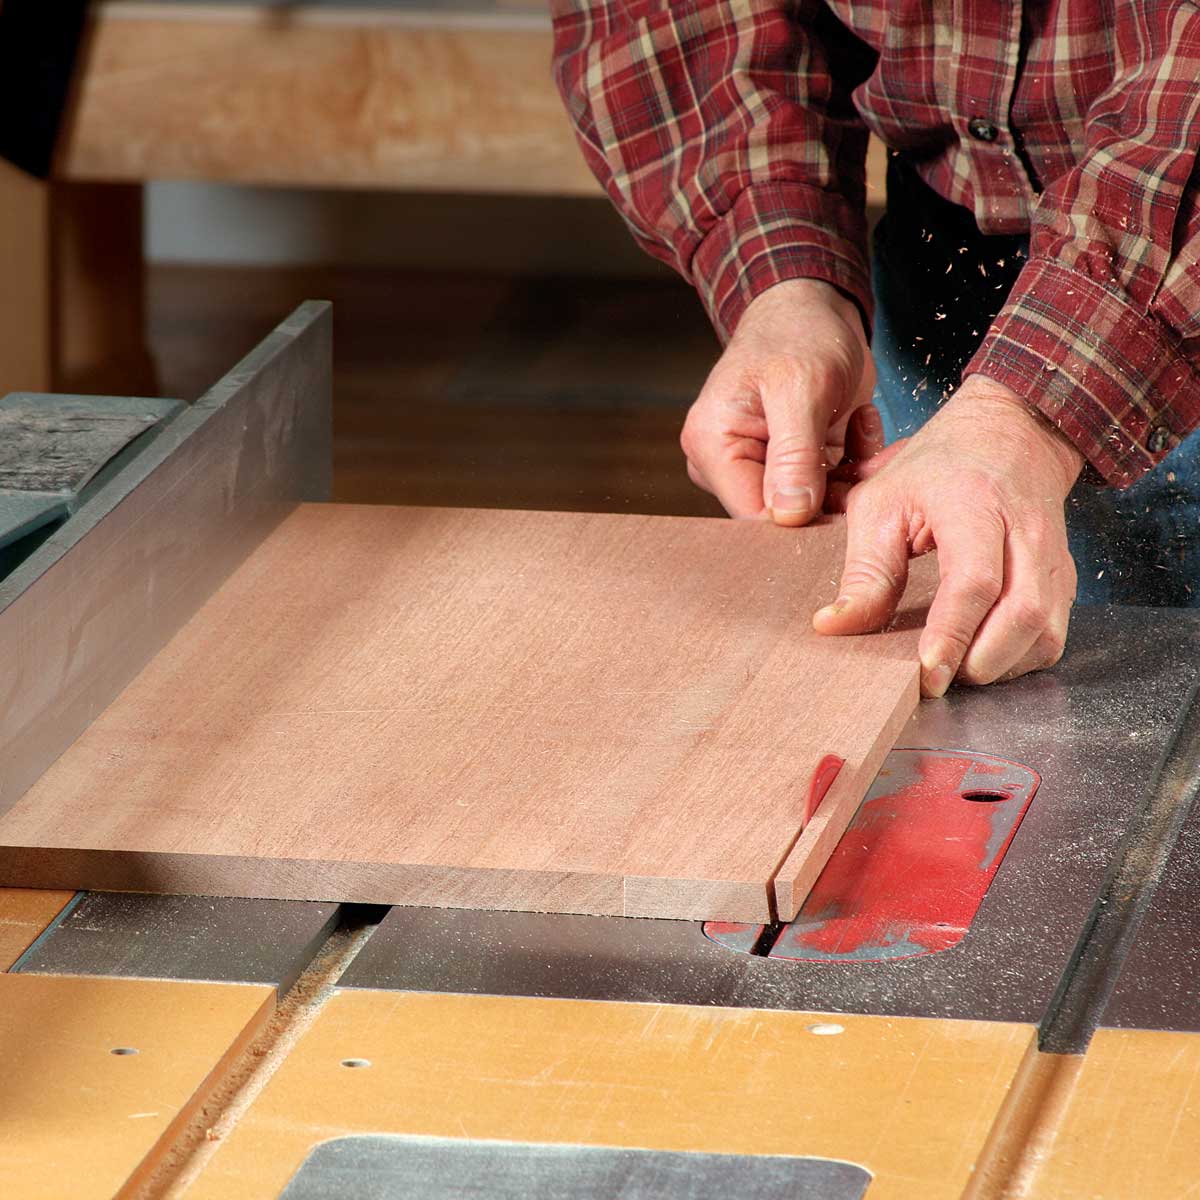 A simple setup block with beveled edges makes it easy to set up the tablesaw to make the compound-angle cuts.